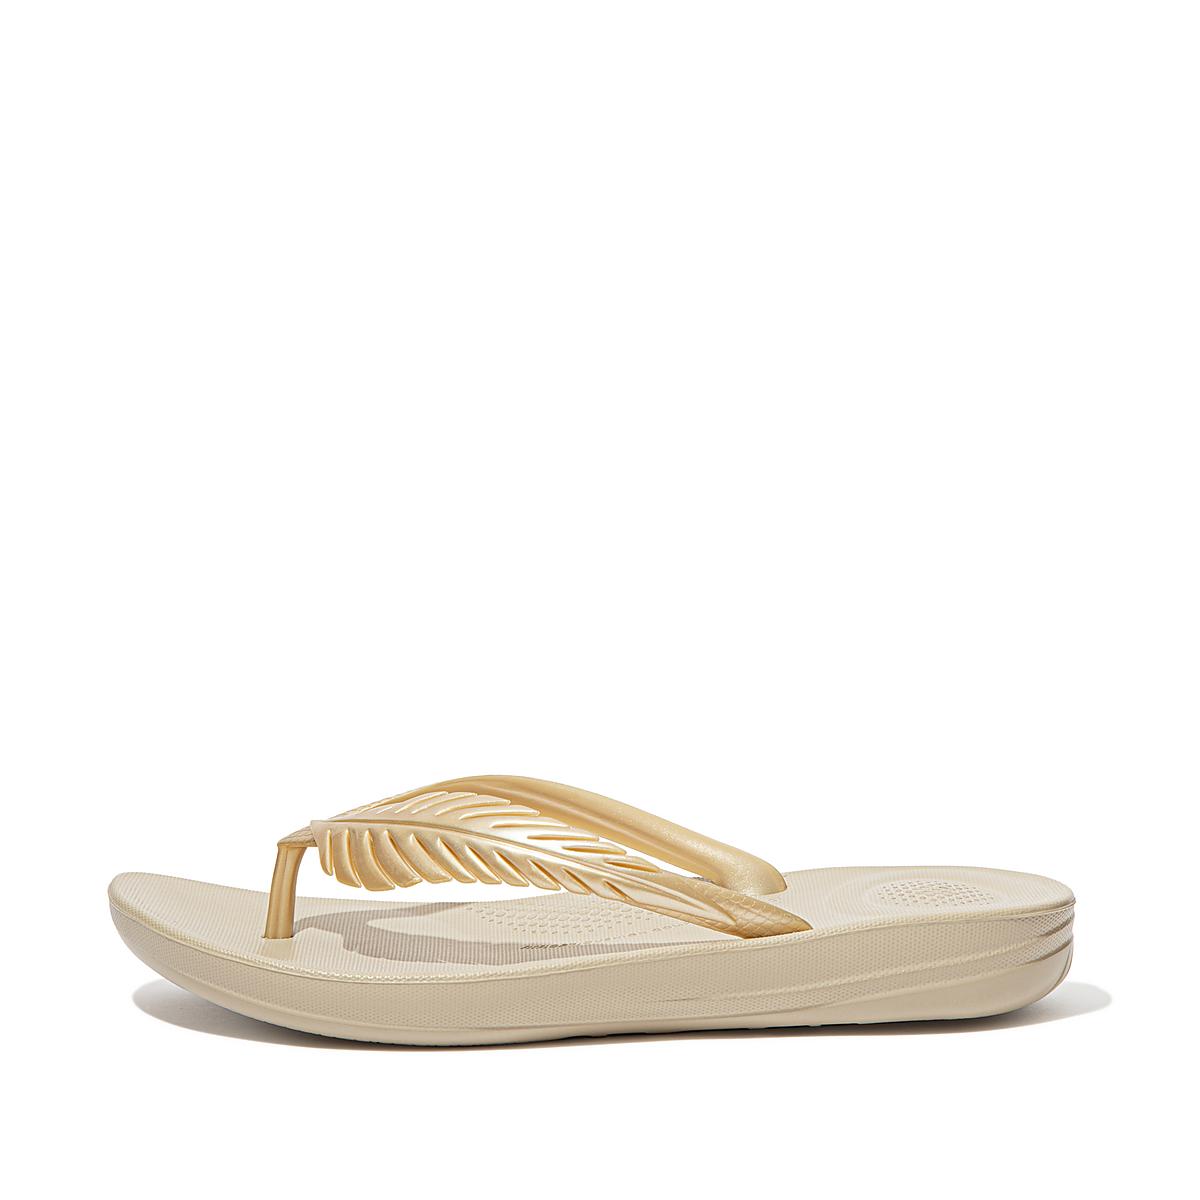 Chanclas Fitflop Mujer - Fitflop Iqushion Feather Marrones/Doradas